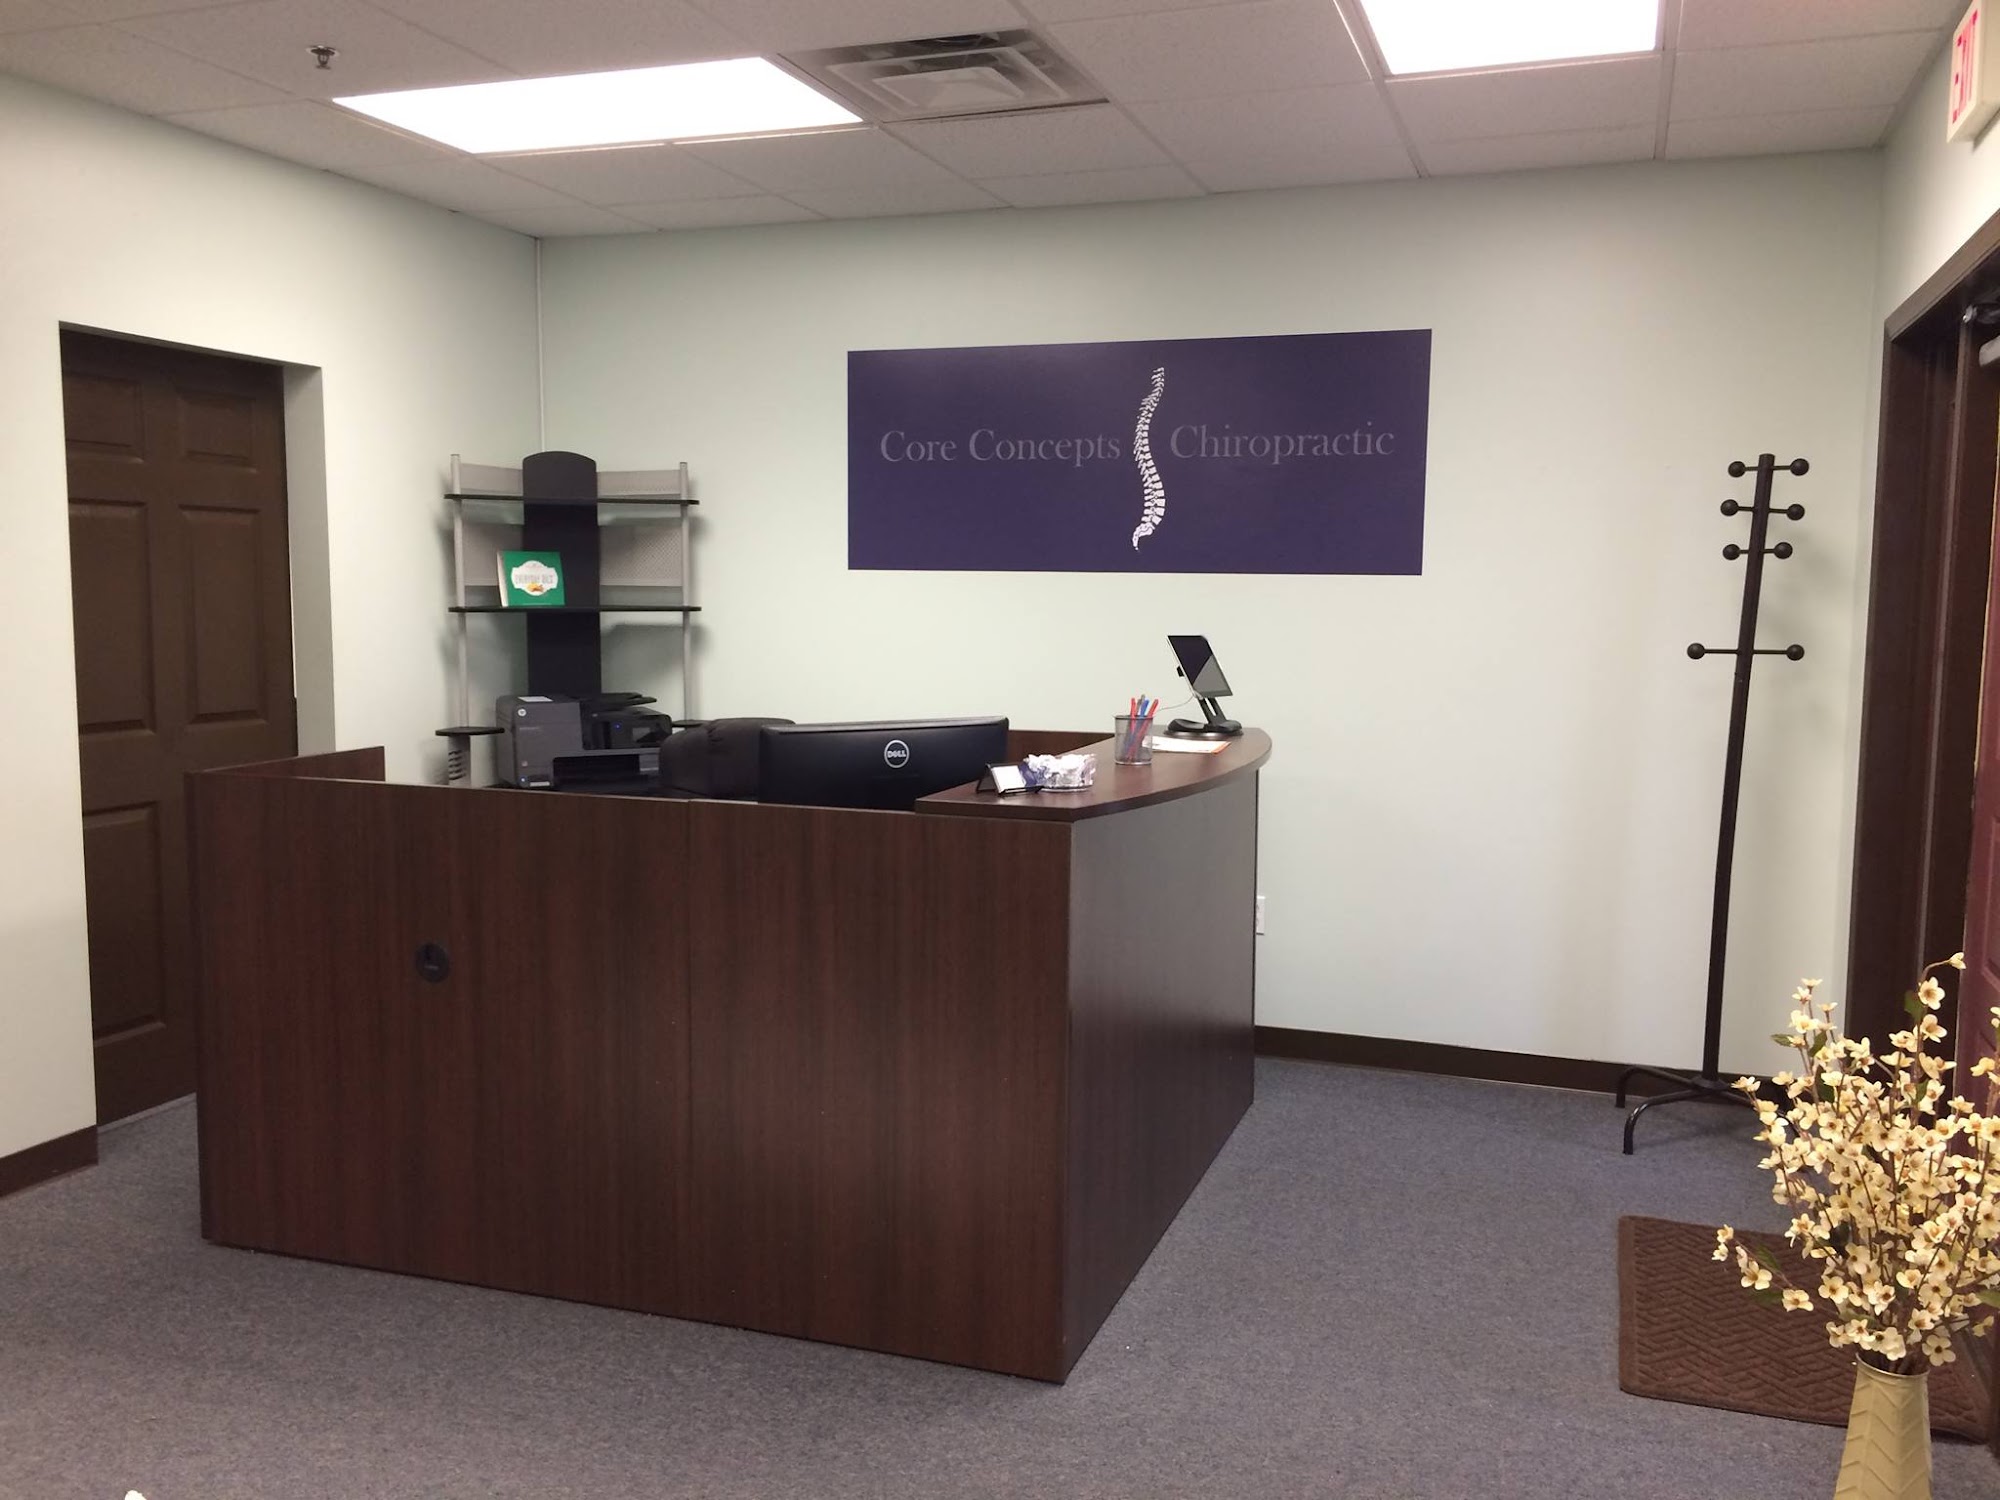 Core Concepts Chiropractic by Roselle 42882 Truro Parish Dr STE 207, Broadlands Virginia 20148